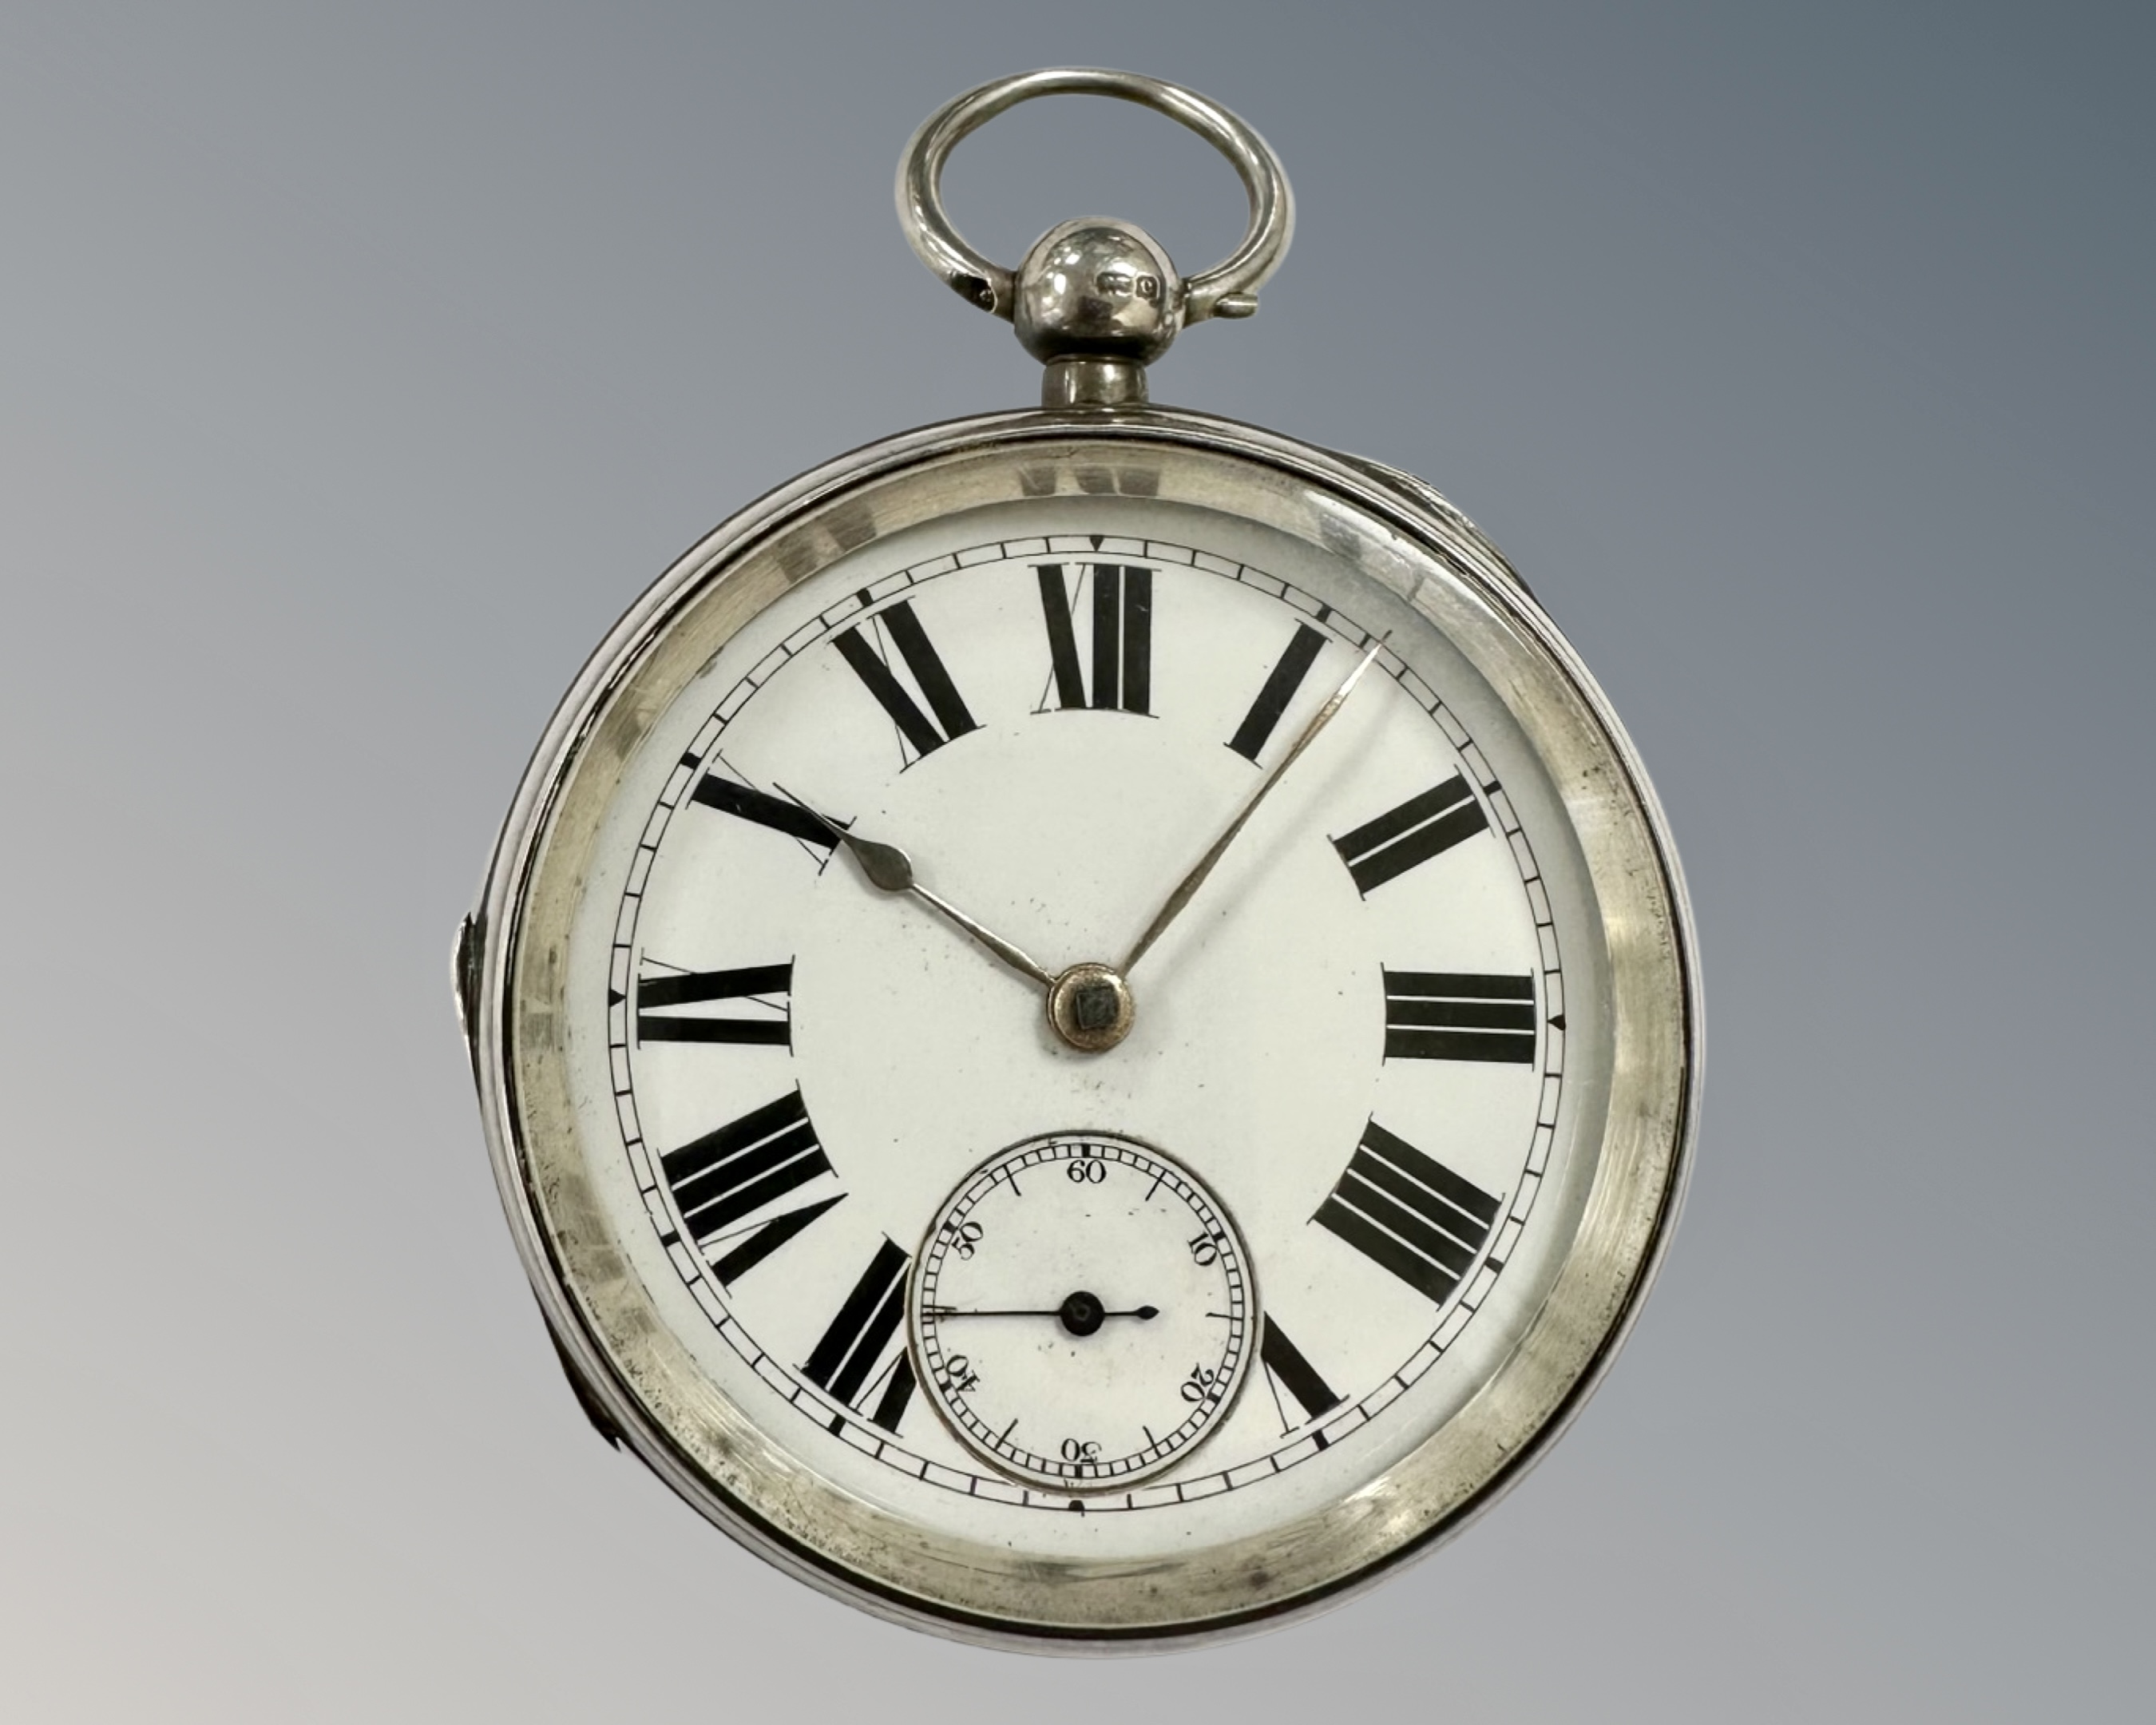 A silver open-faced key-wound pocket watch by The American Watch Co, Waltham, Massachusetts,